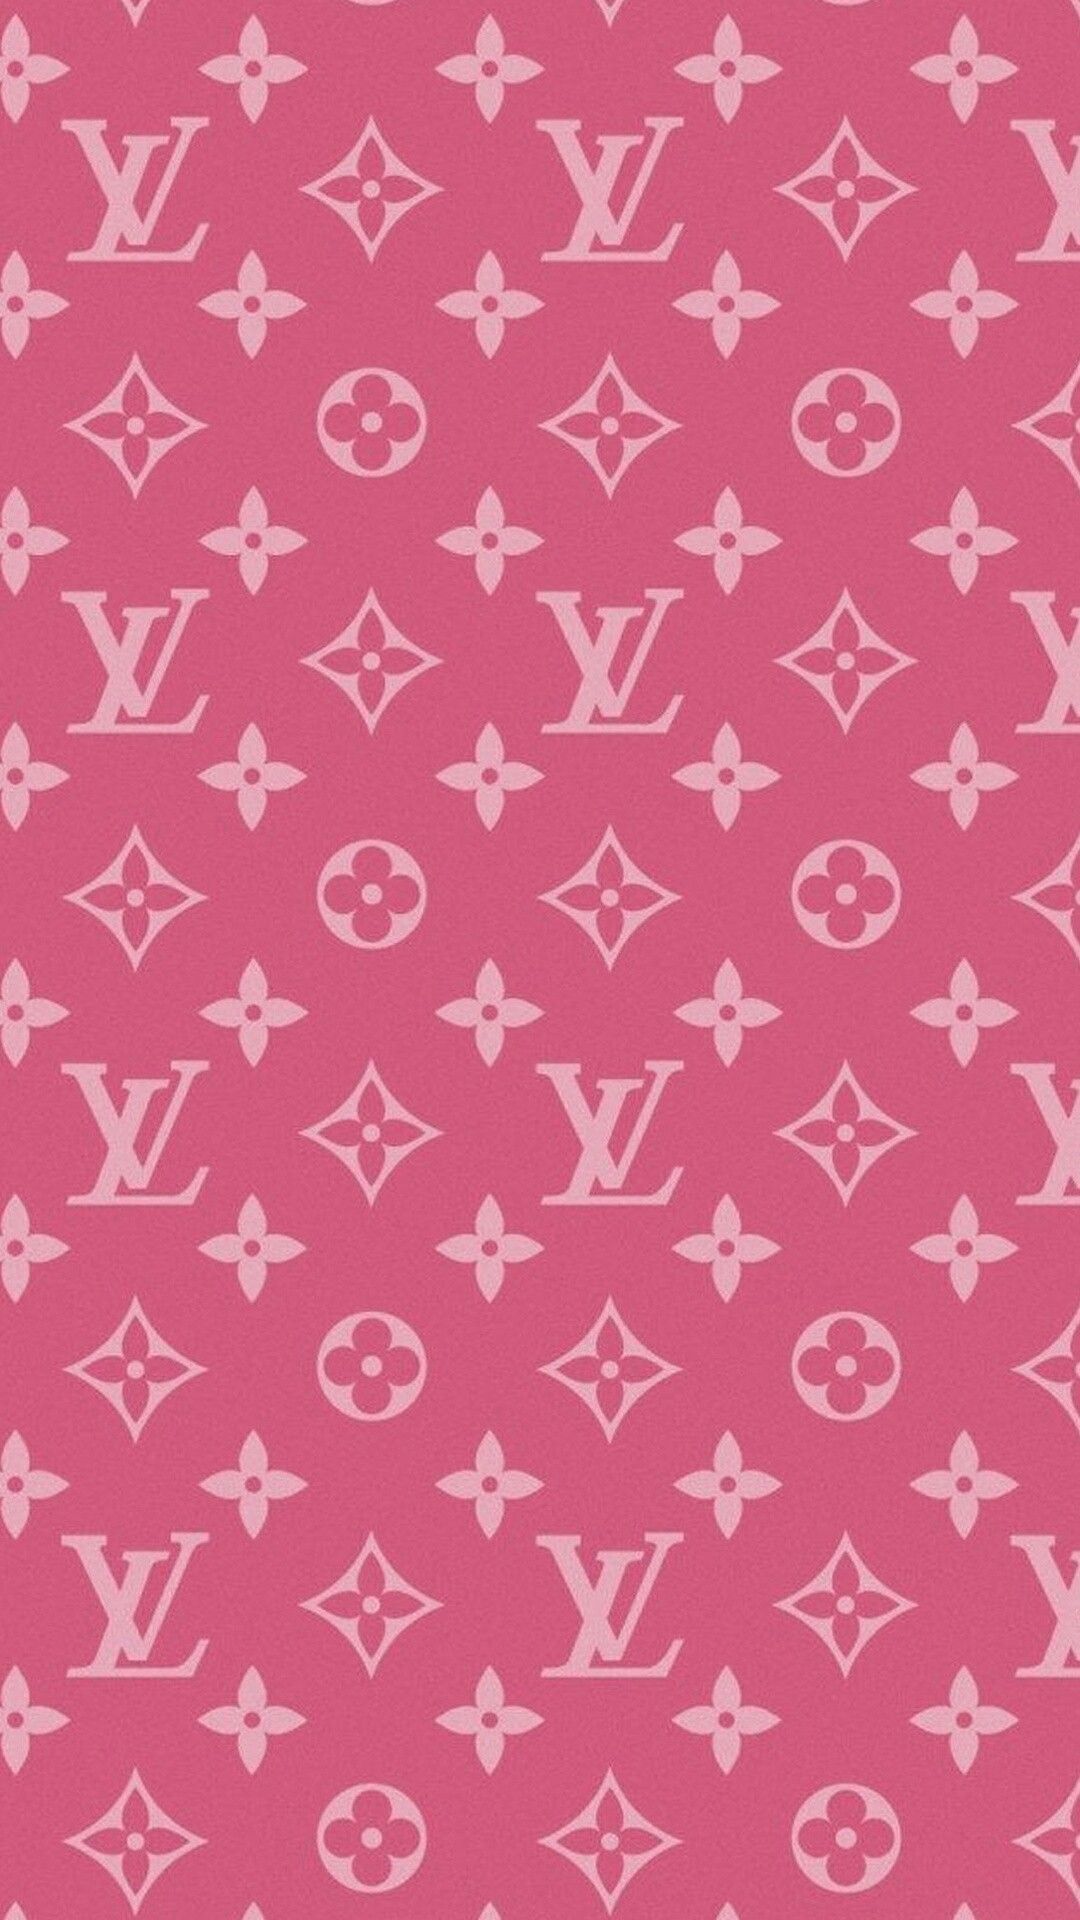 Free download SUPREME x LOUIS VUITTON Wallpapers in 2019 Supreme